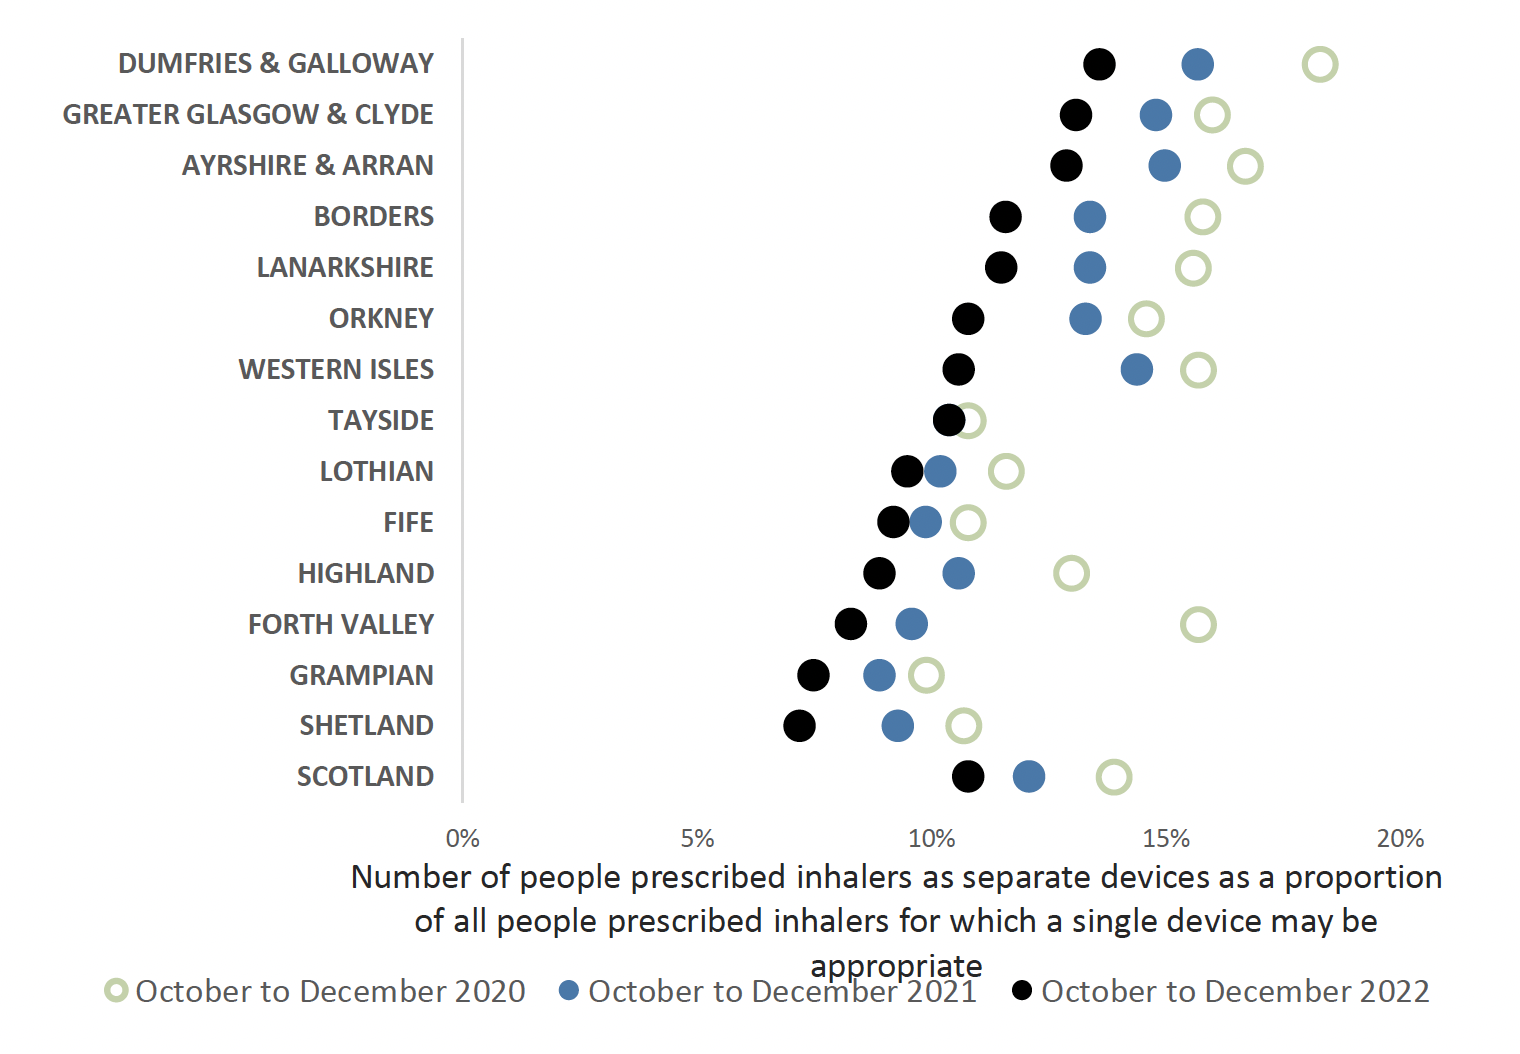 Chart showing variance in people receiving separate devices when a combination inhaler may be appropriate across all health boards and Scotland from 2020 to 2022. Overall Scotland trend is decreasing